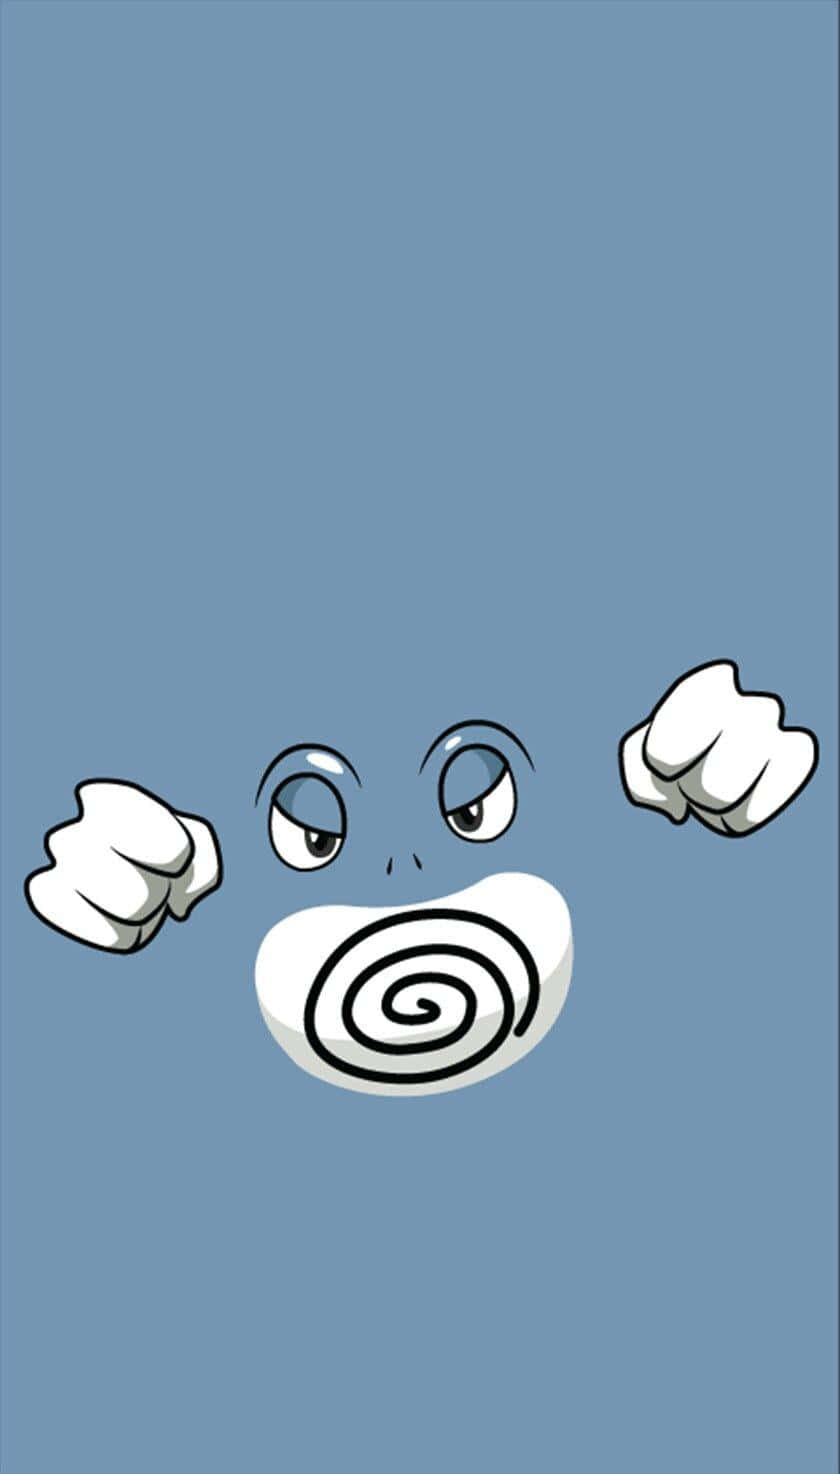 Cute And Simple Poliwrath Wallpaper